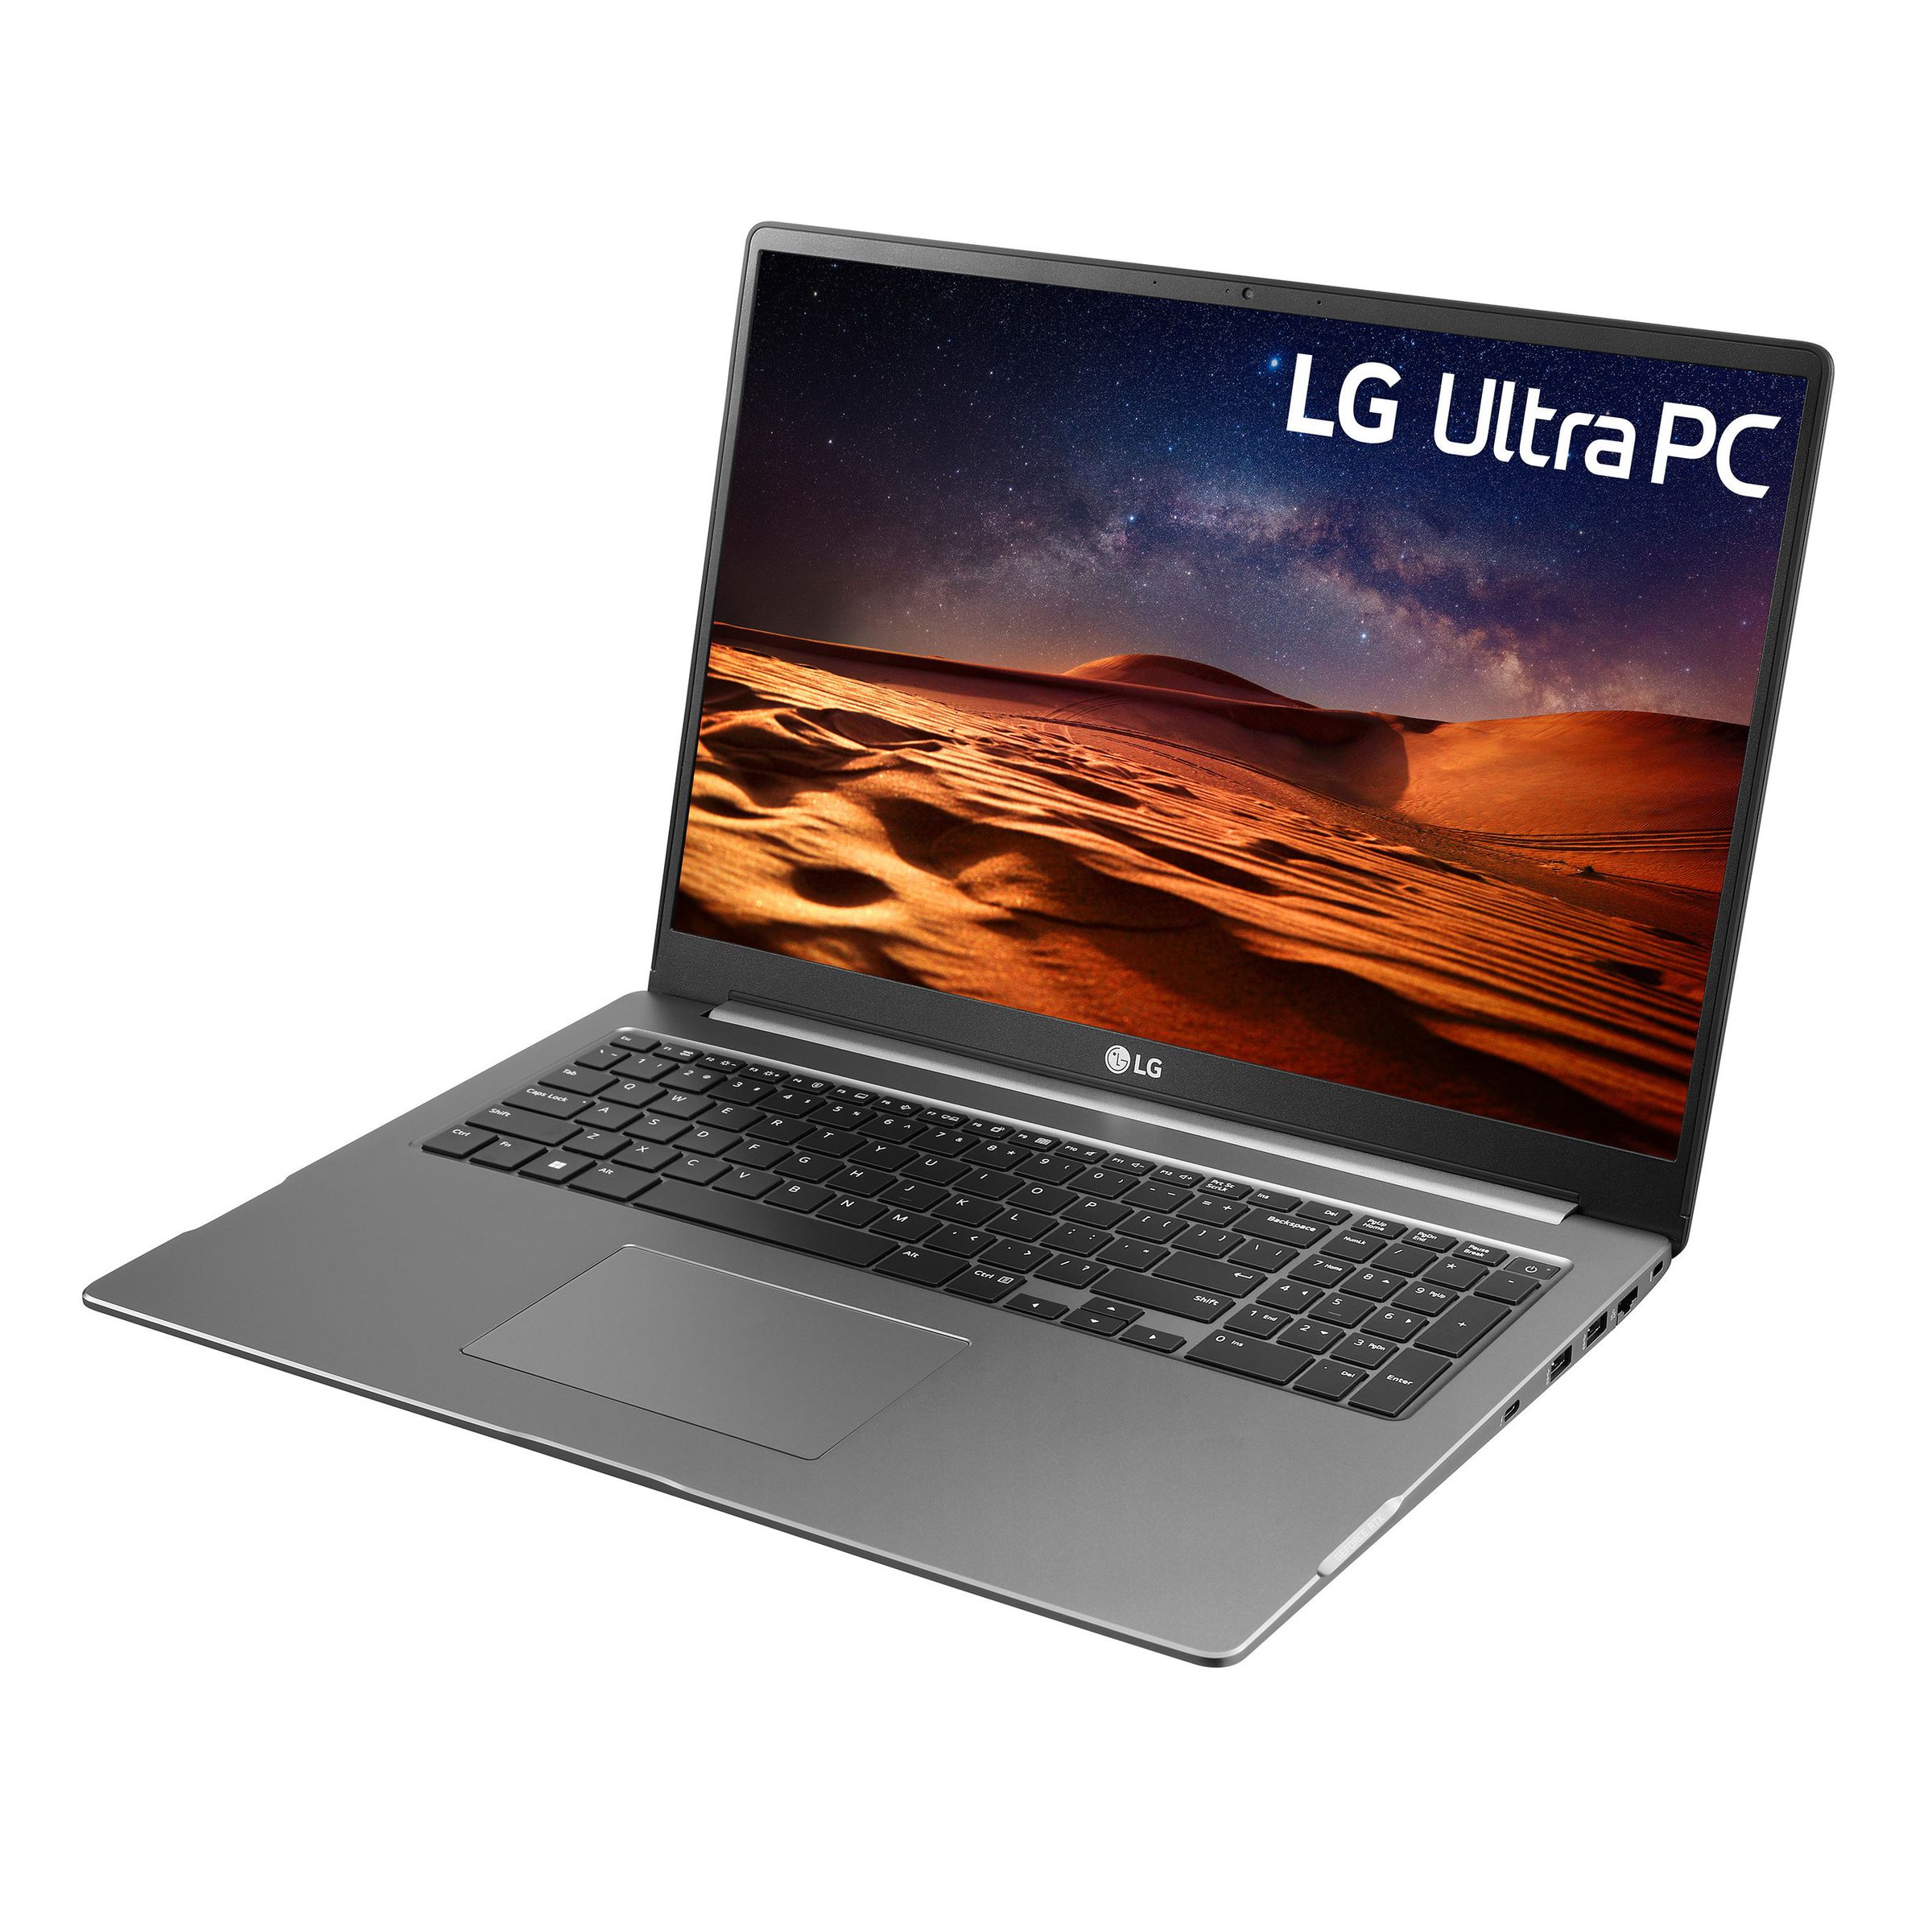 An LG Ultra PC model on a white background open. The screen displays a night desert scene with LG UltraPC printed in the top right corner.